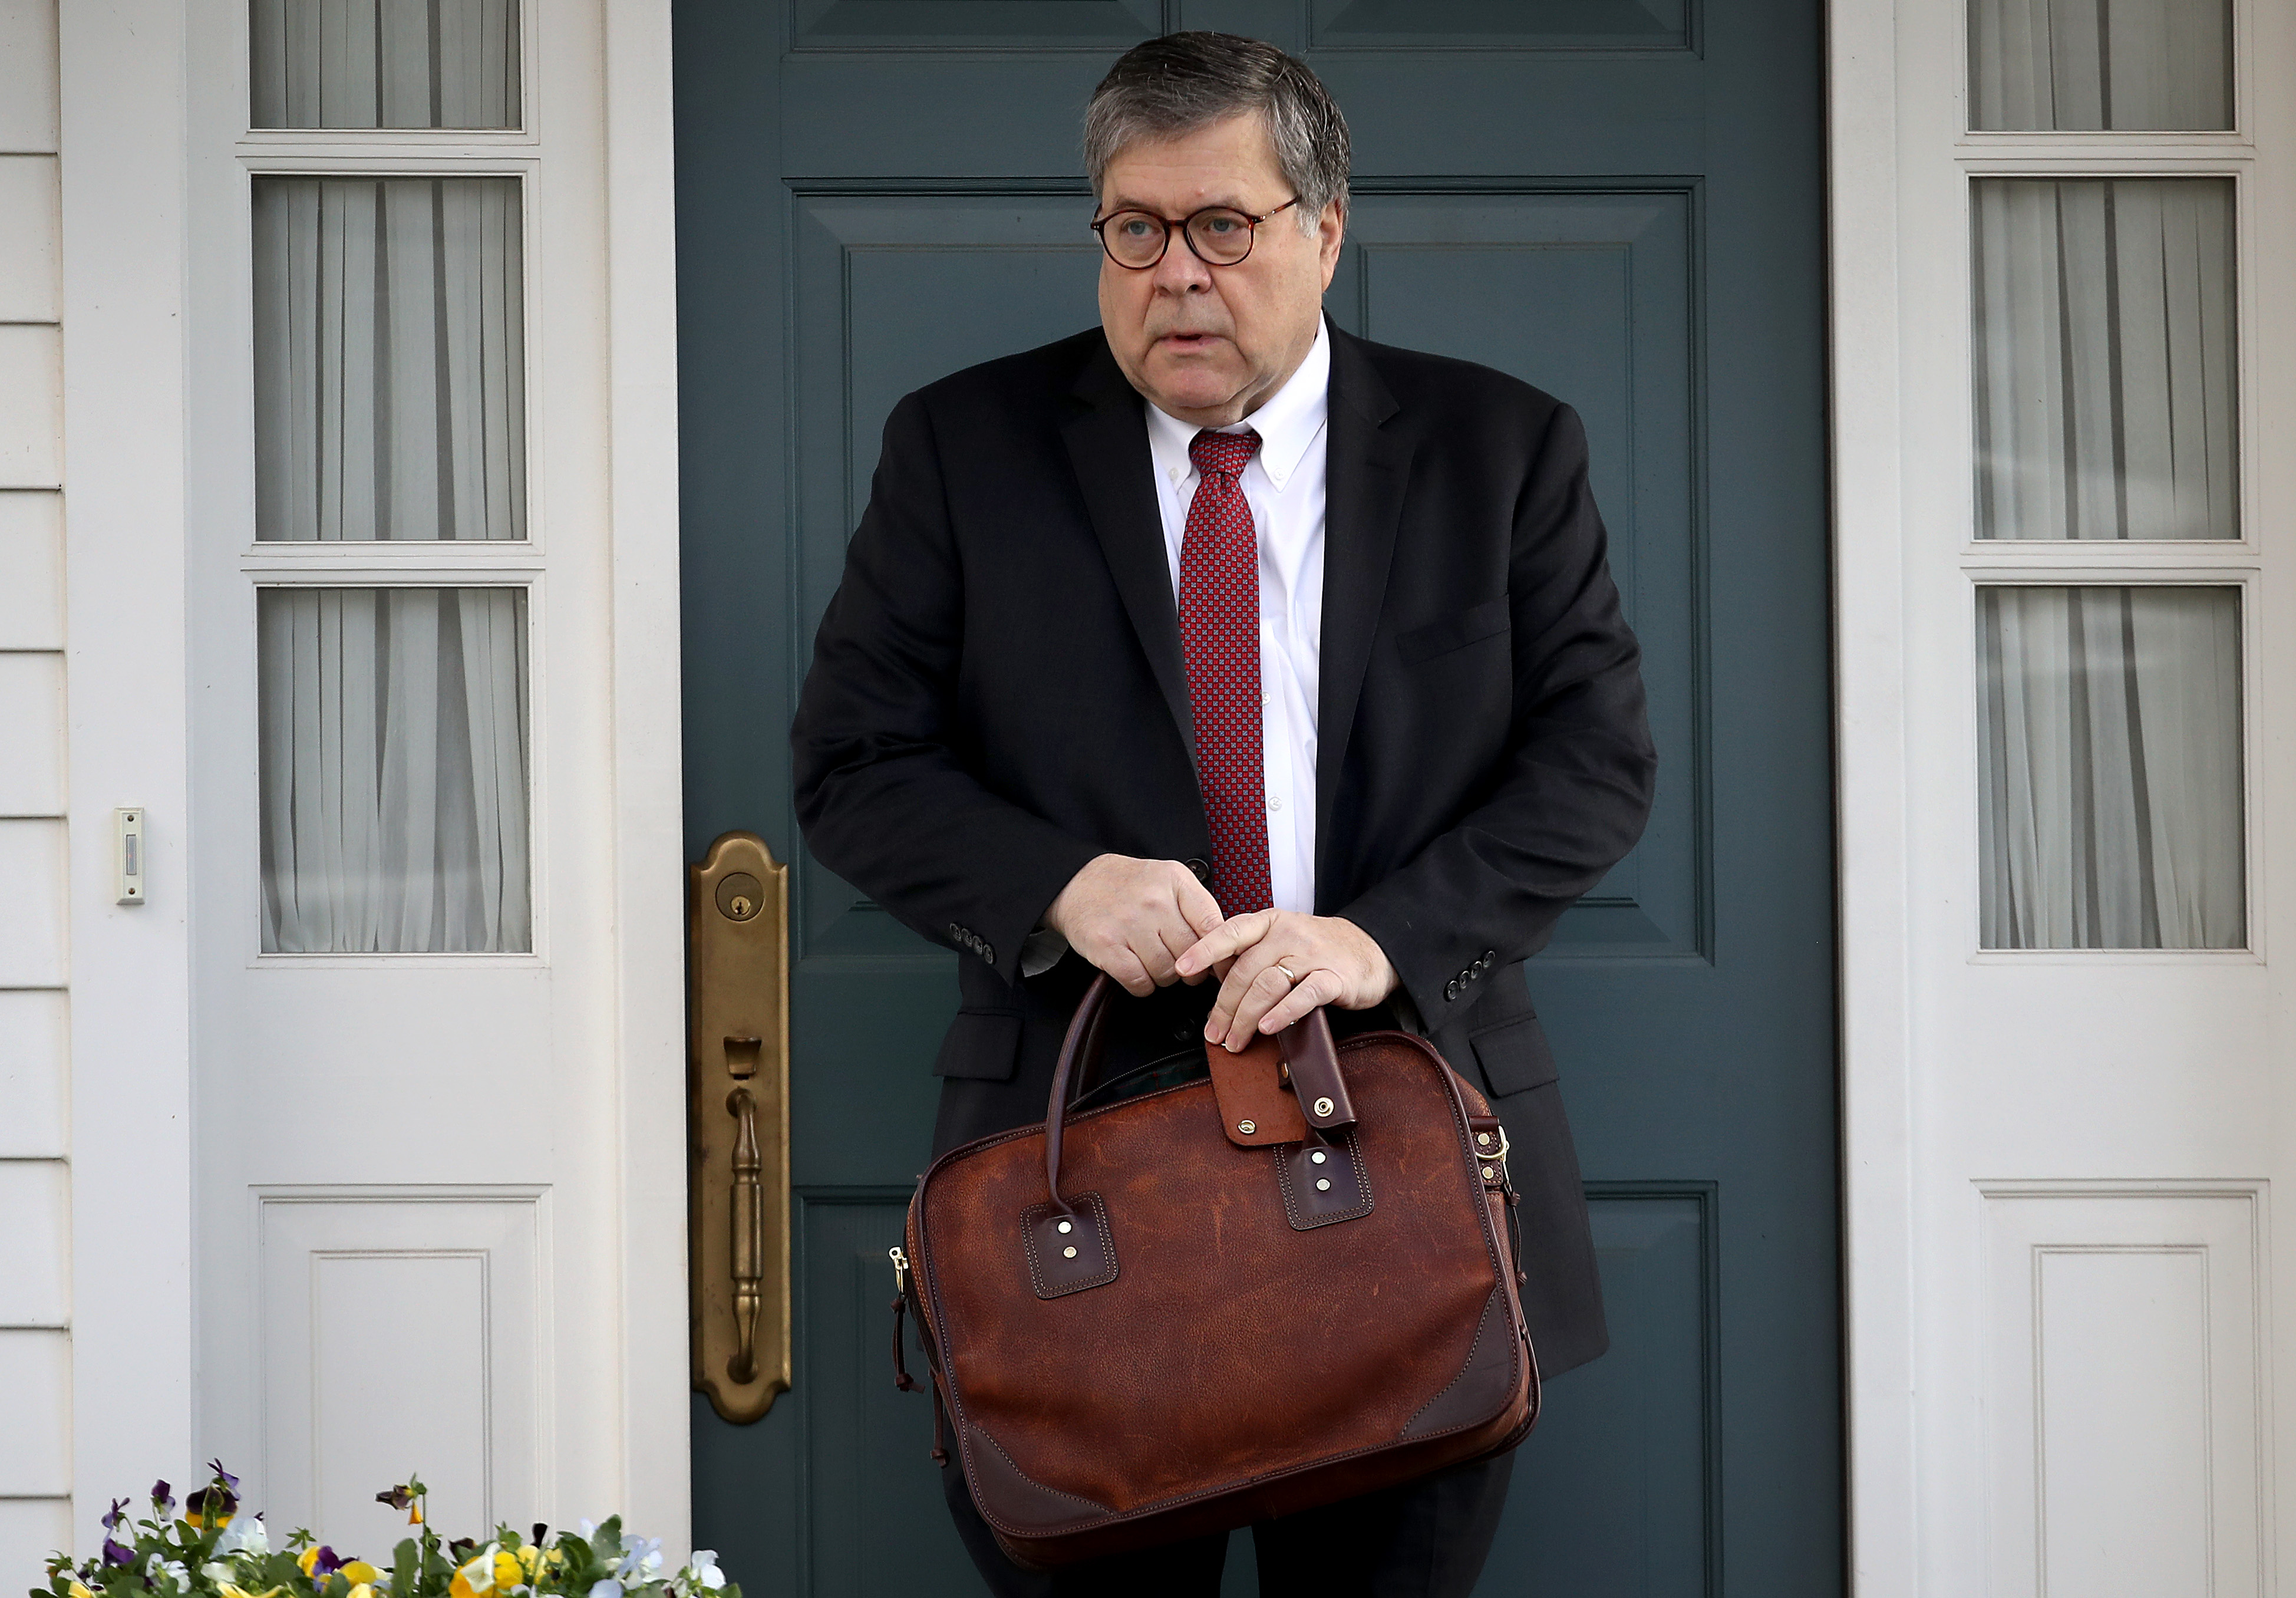 Attorney General William Barr departs his home in McLean